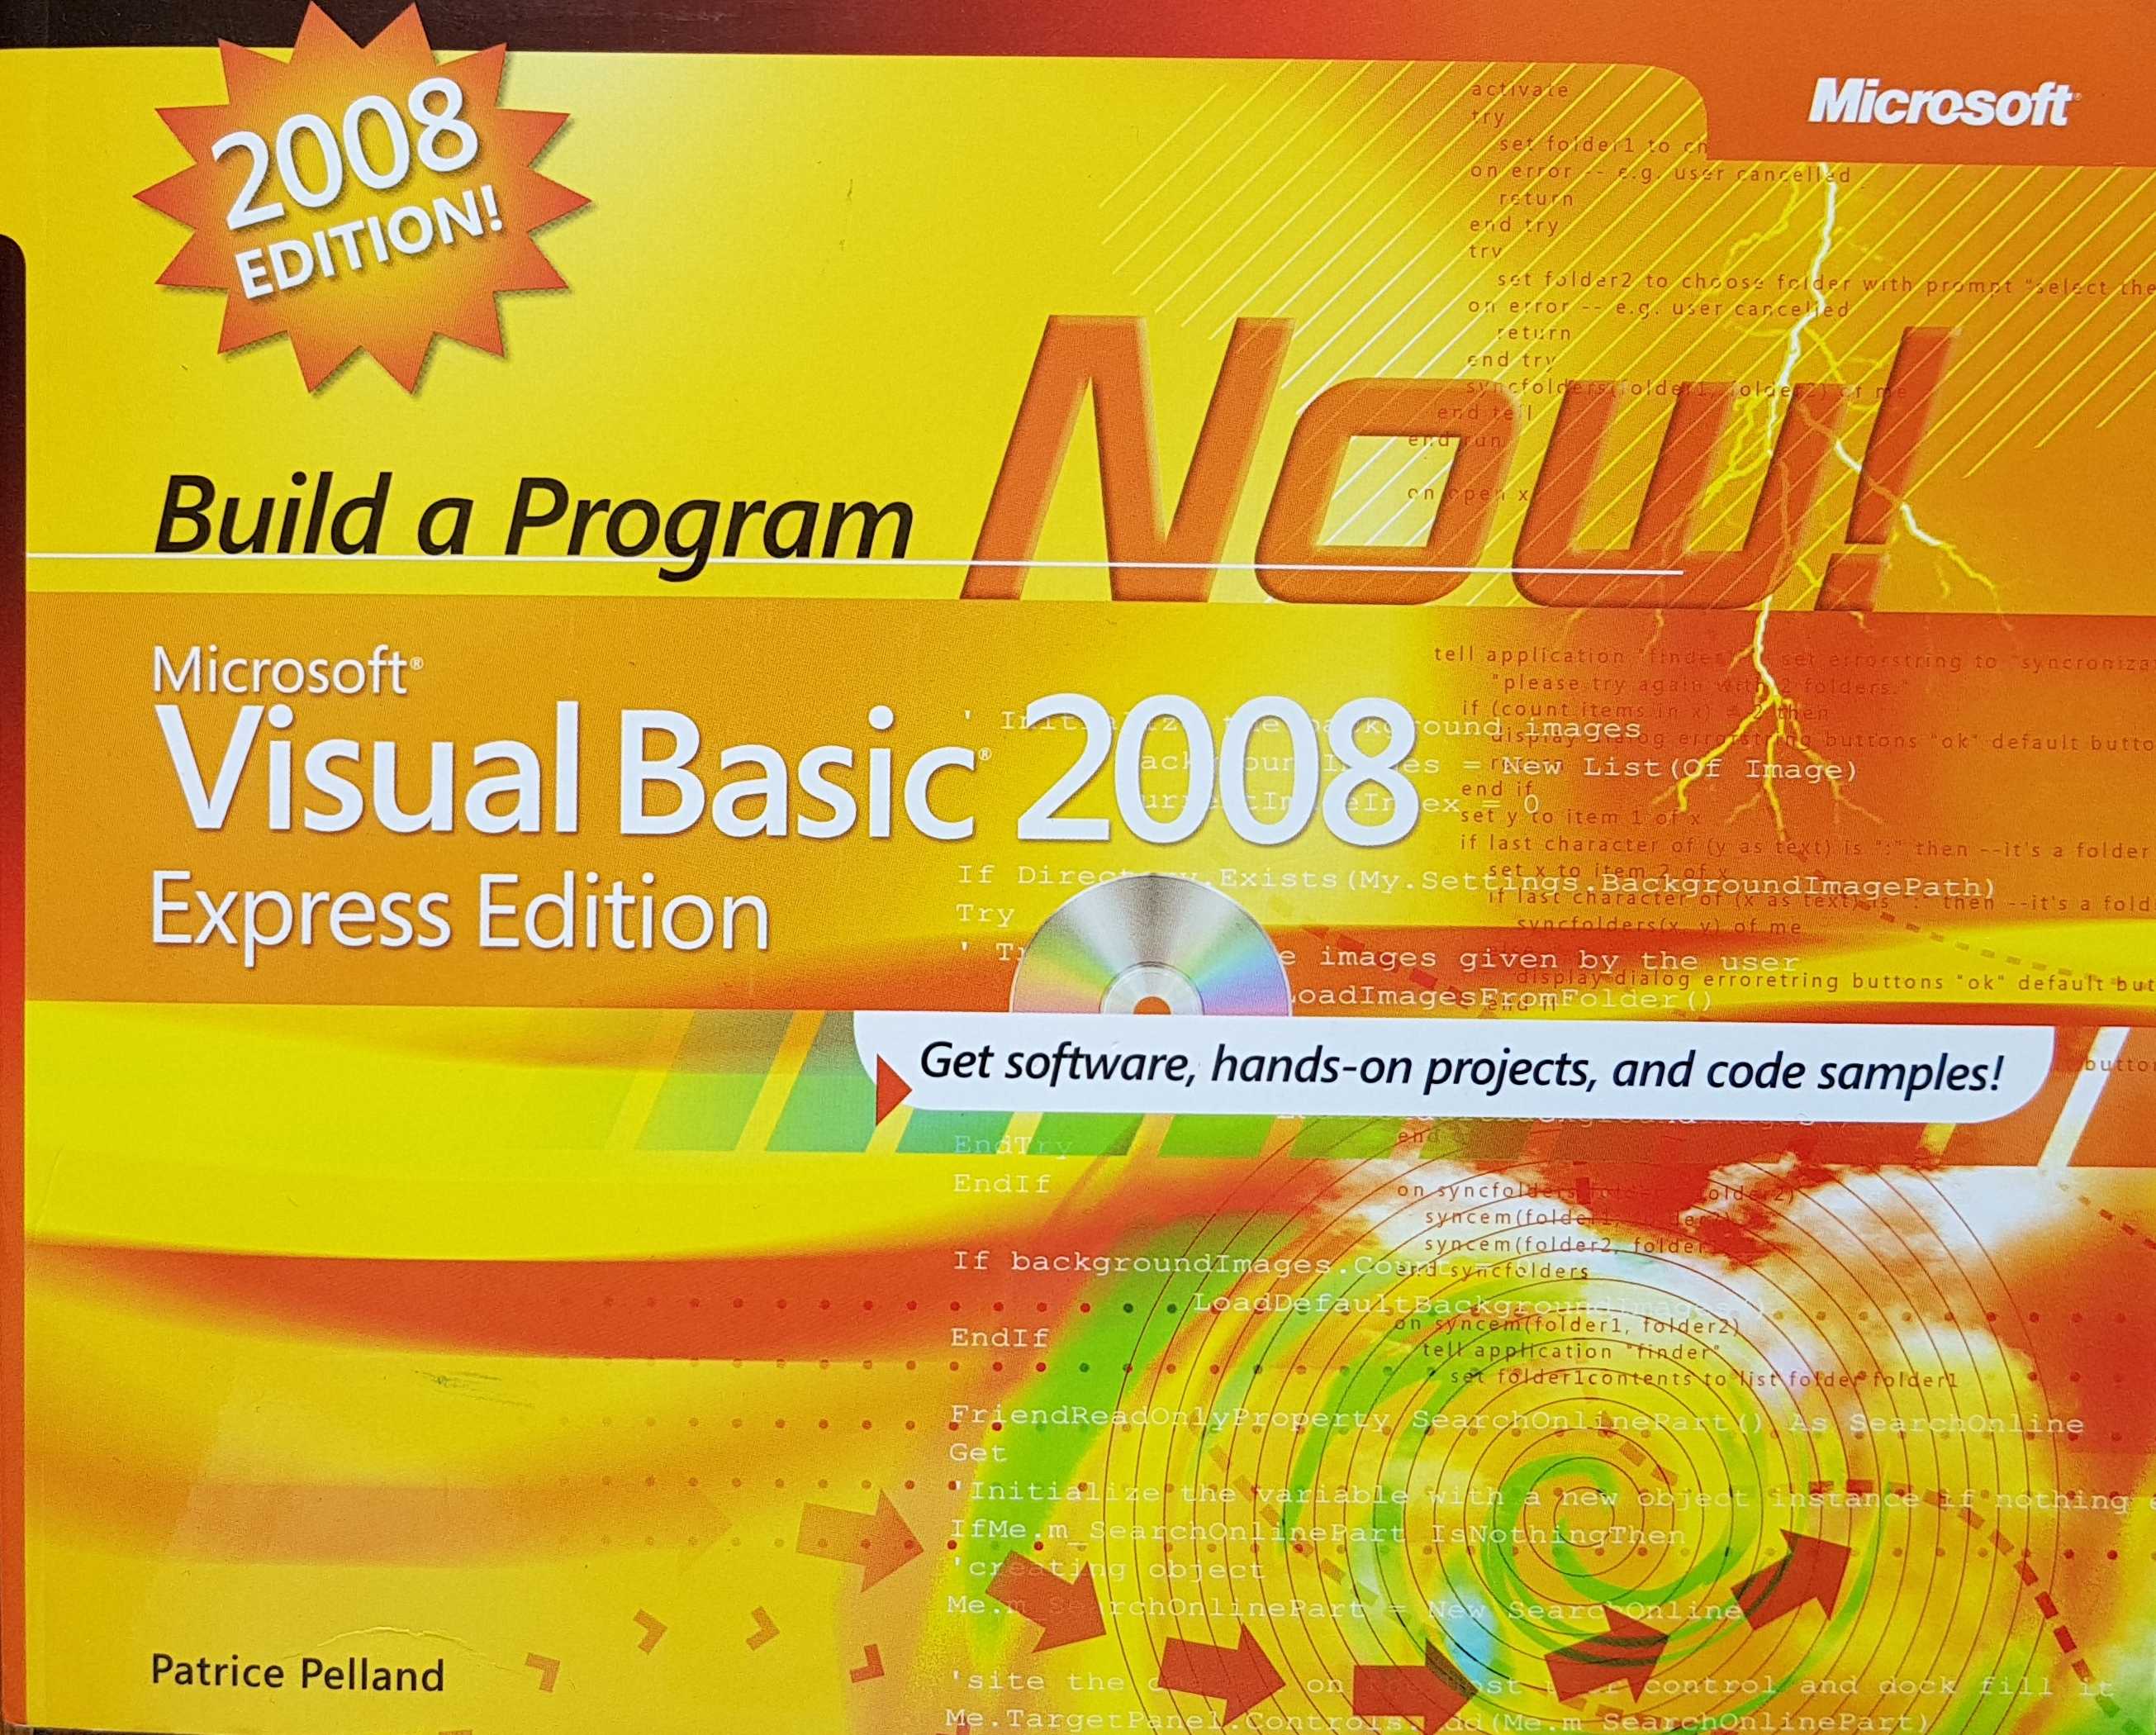 Picture of 0-7356-2541-7 Build a program now! Visual Basic 2008 book by artist Patrice Pelland 